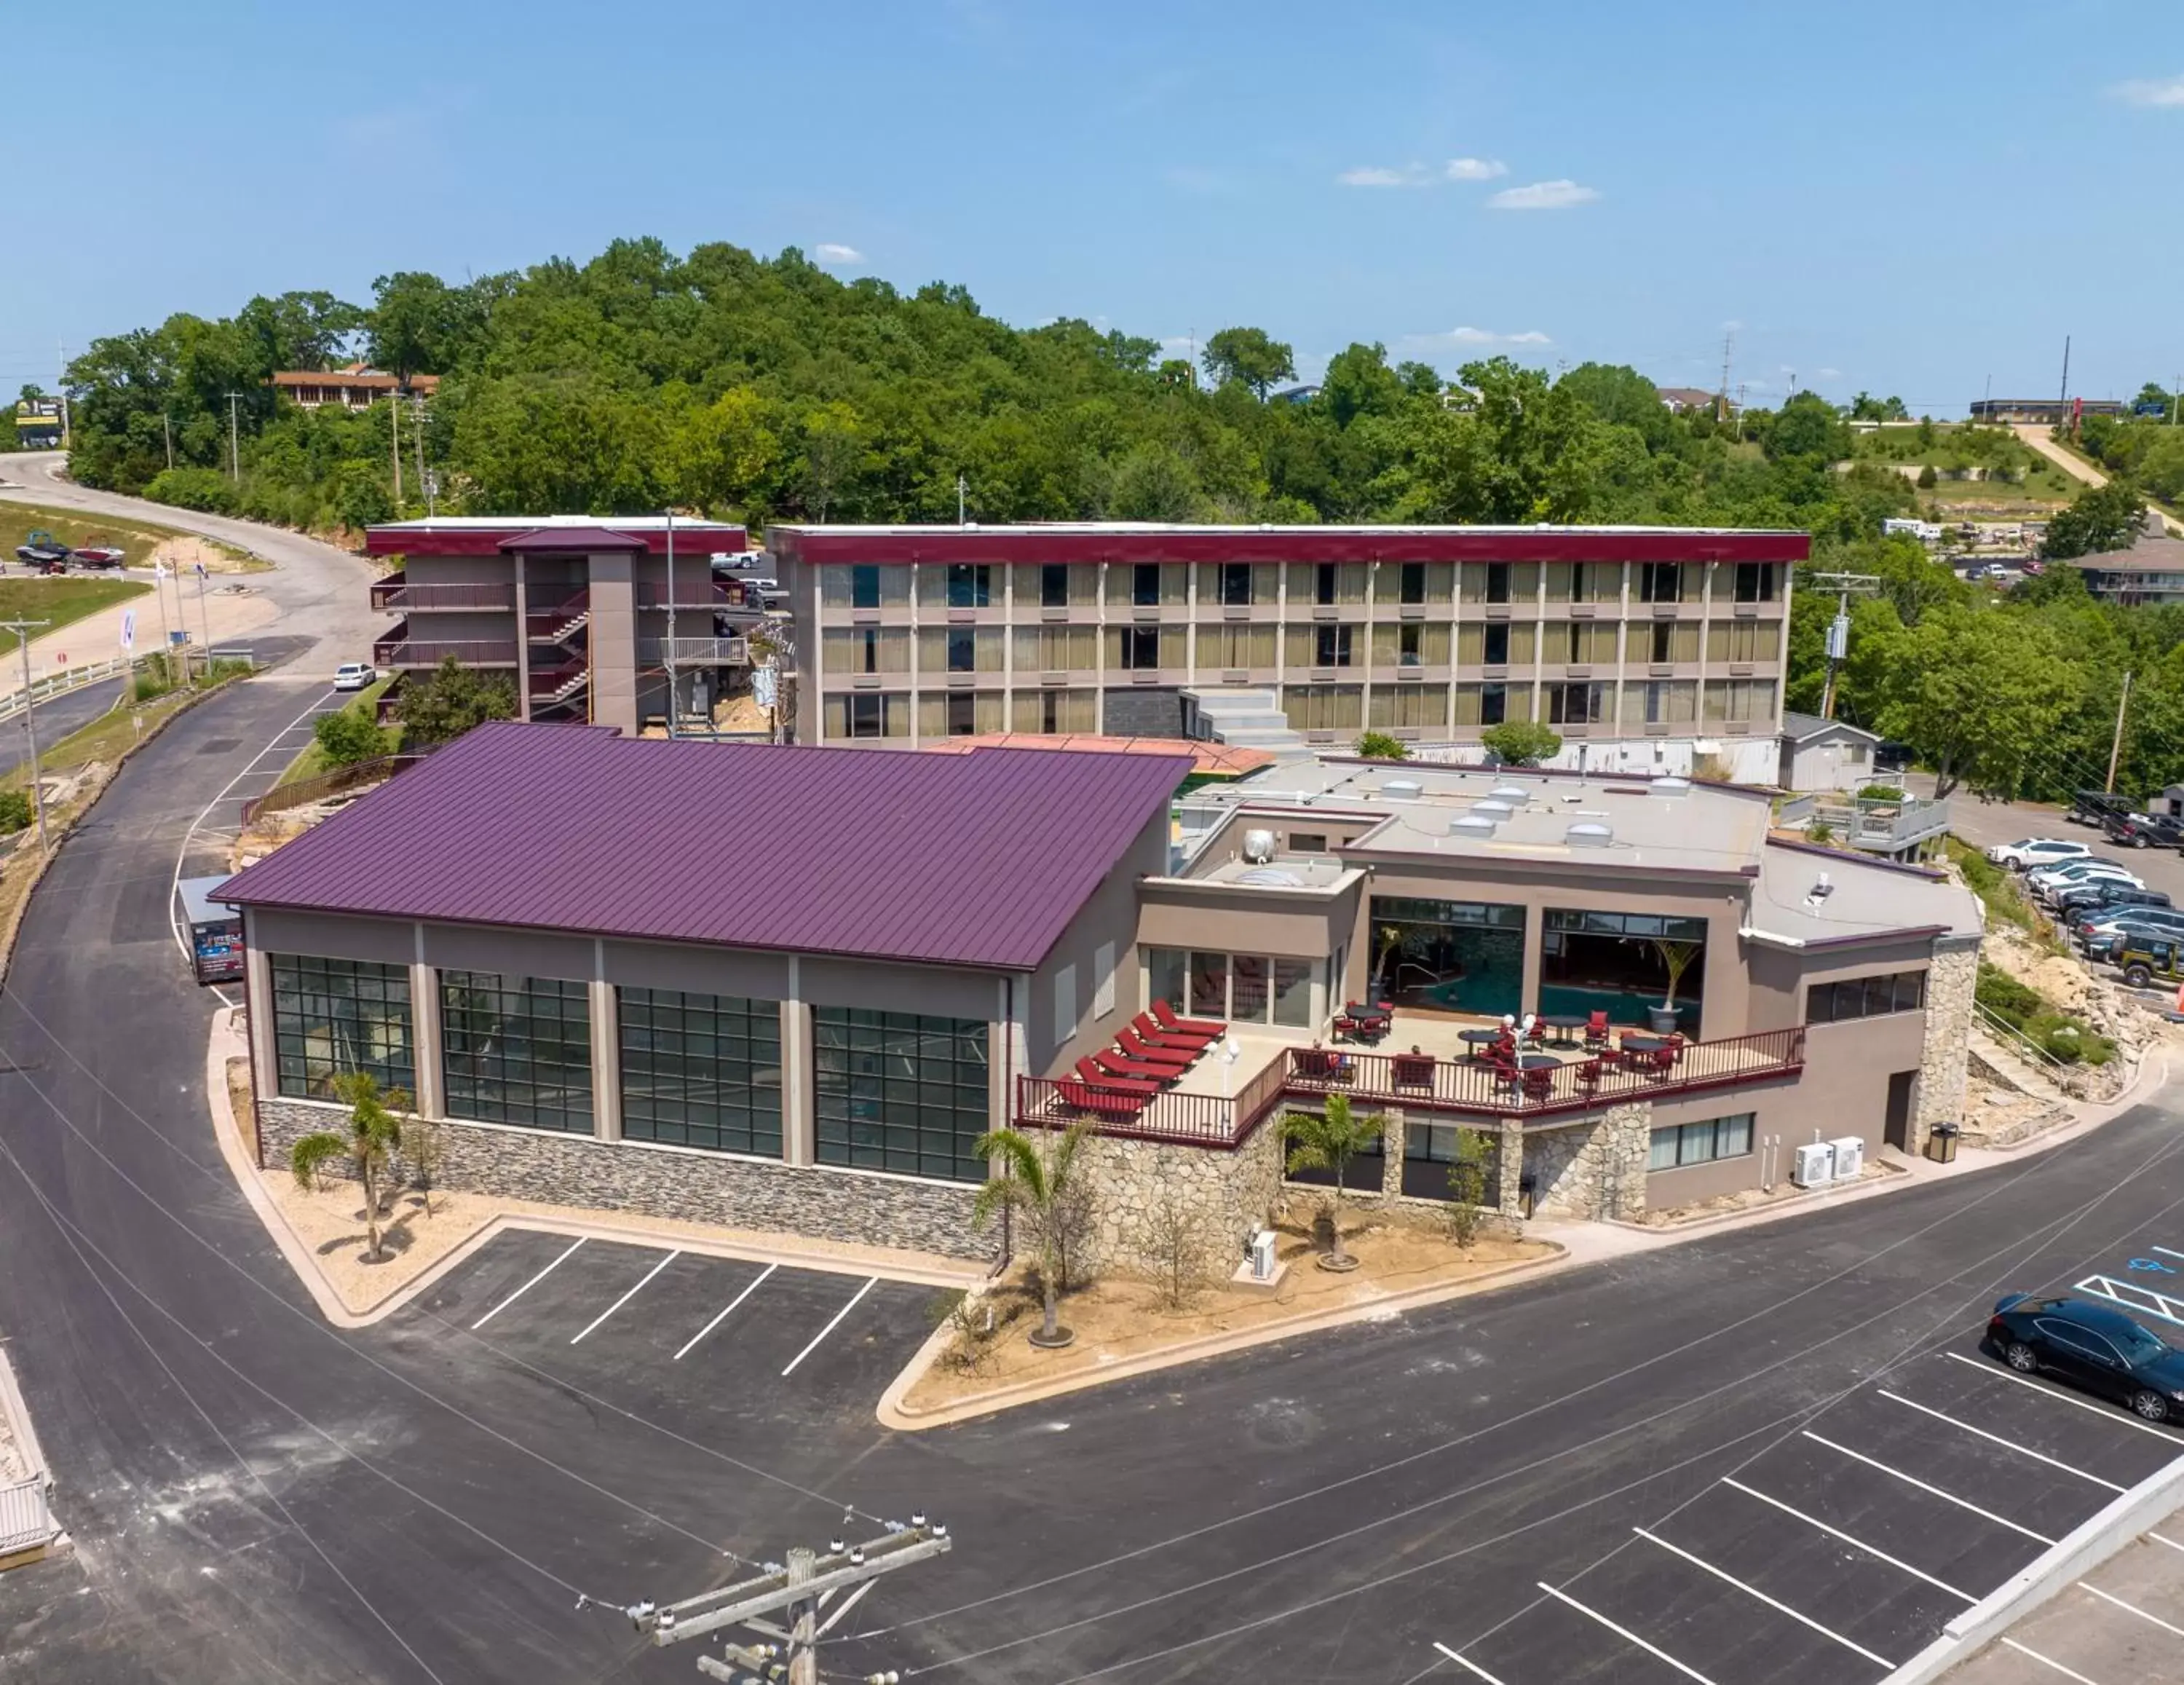 Property building, Bird's-eye View in The Resort at Lake of the Ozarks